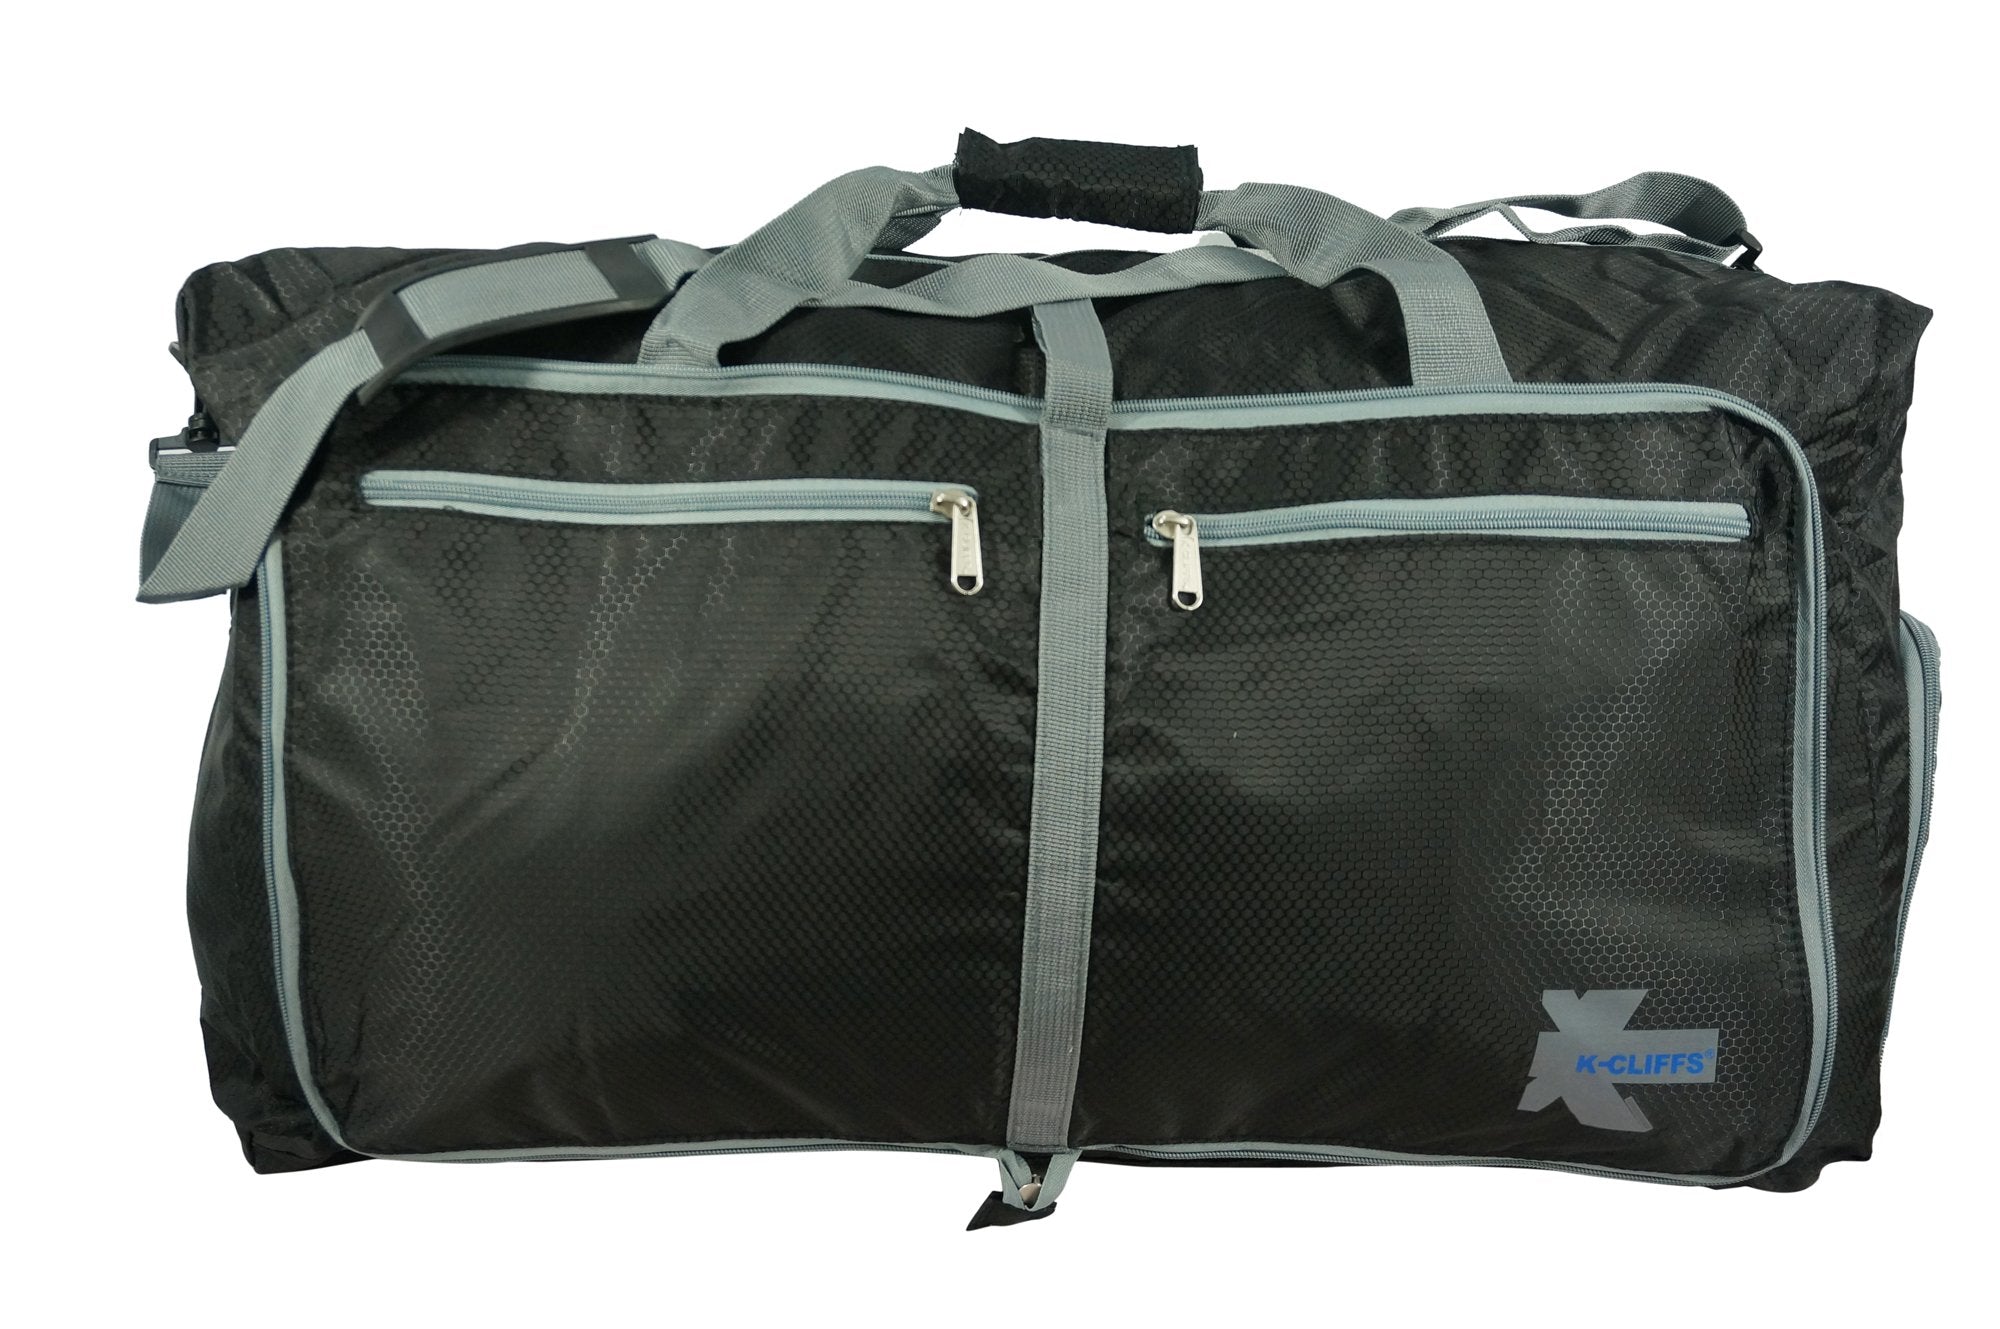 The Wandf Foldable Travel Duffel Bag Is Voted Best for Multipurpose Trips